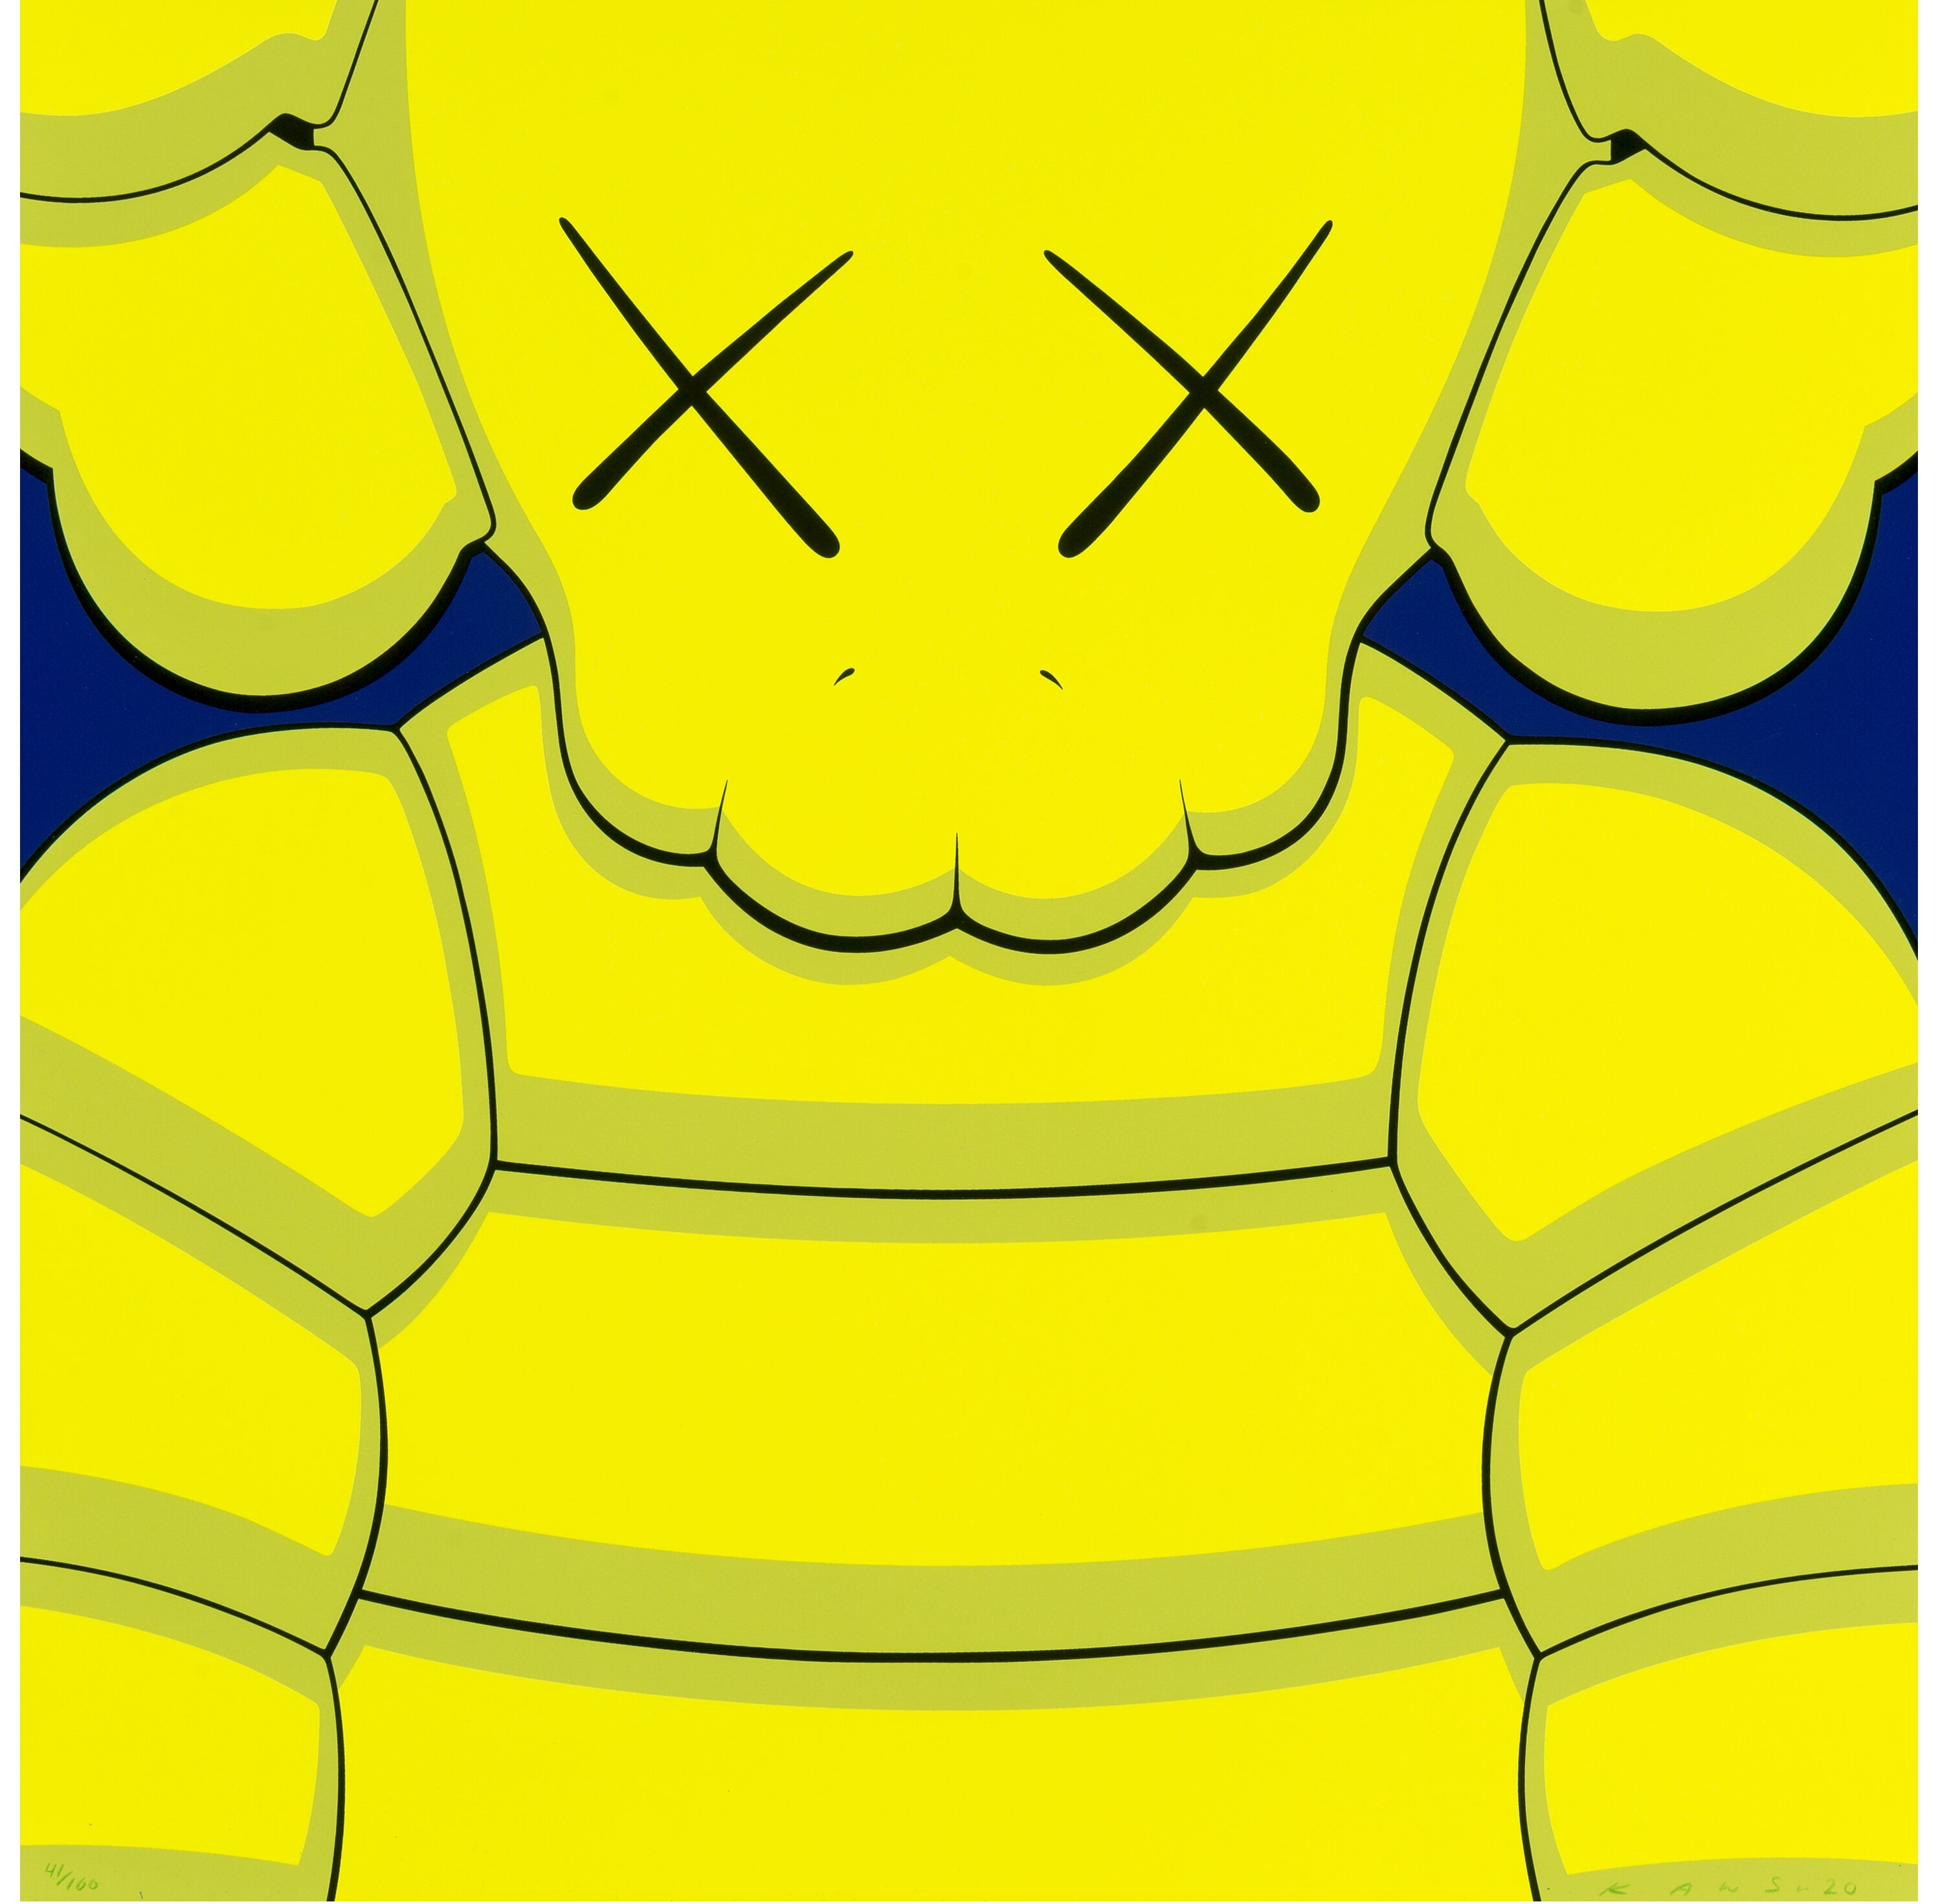 KAWS | What Party (Yellow) (2020) | Compare similar artworks